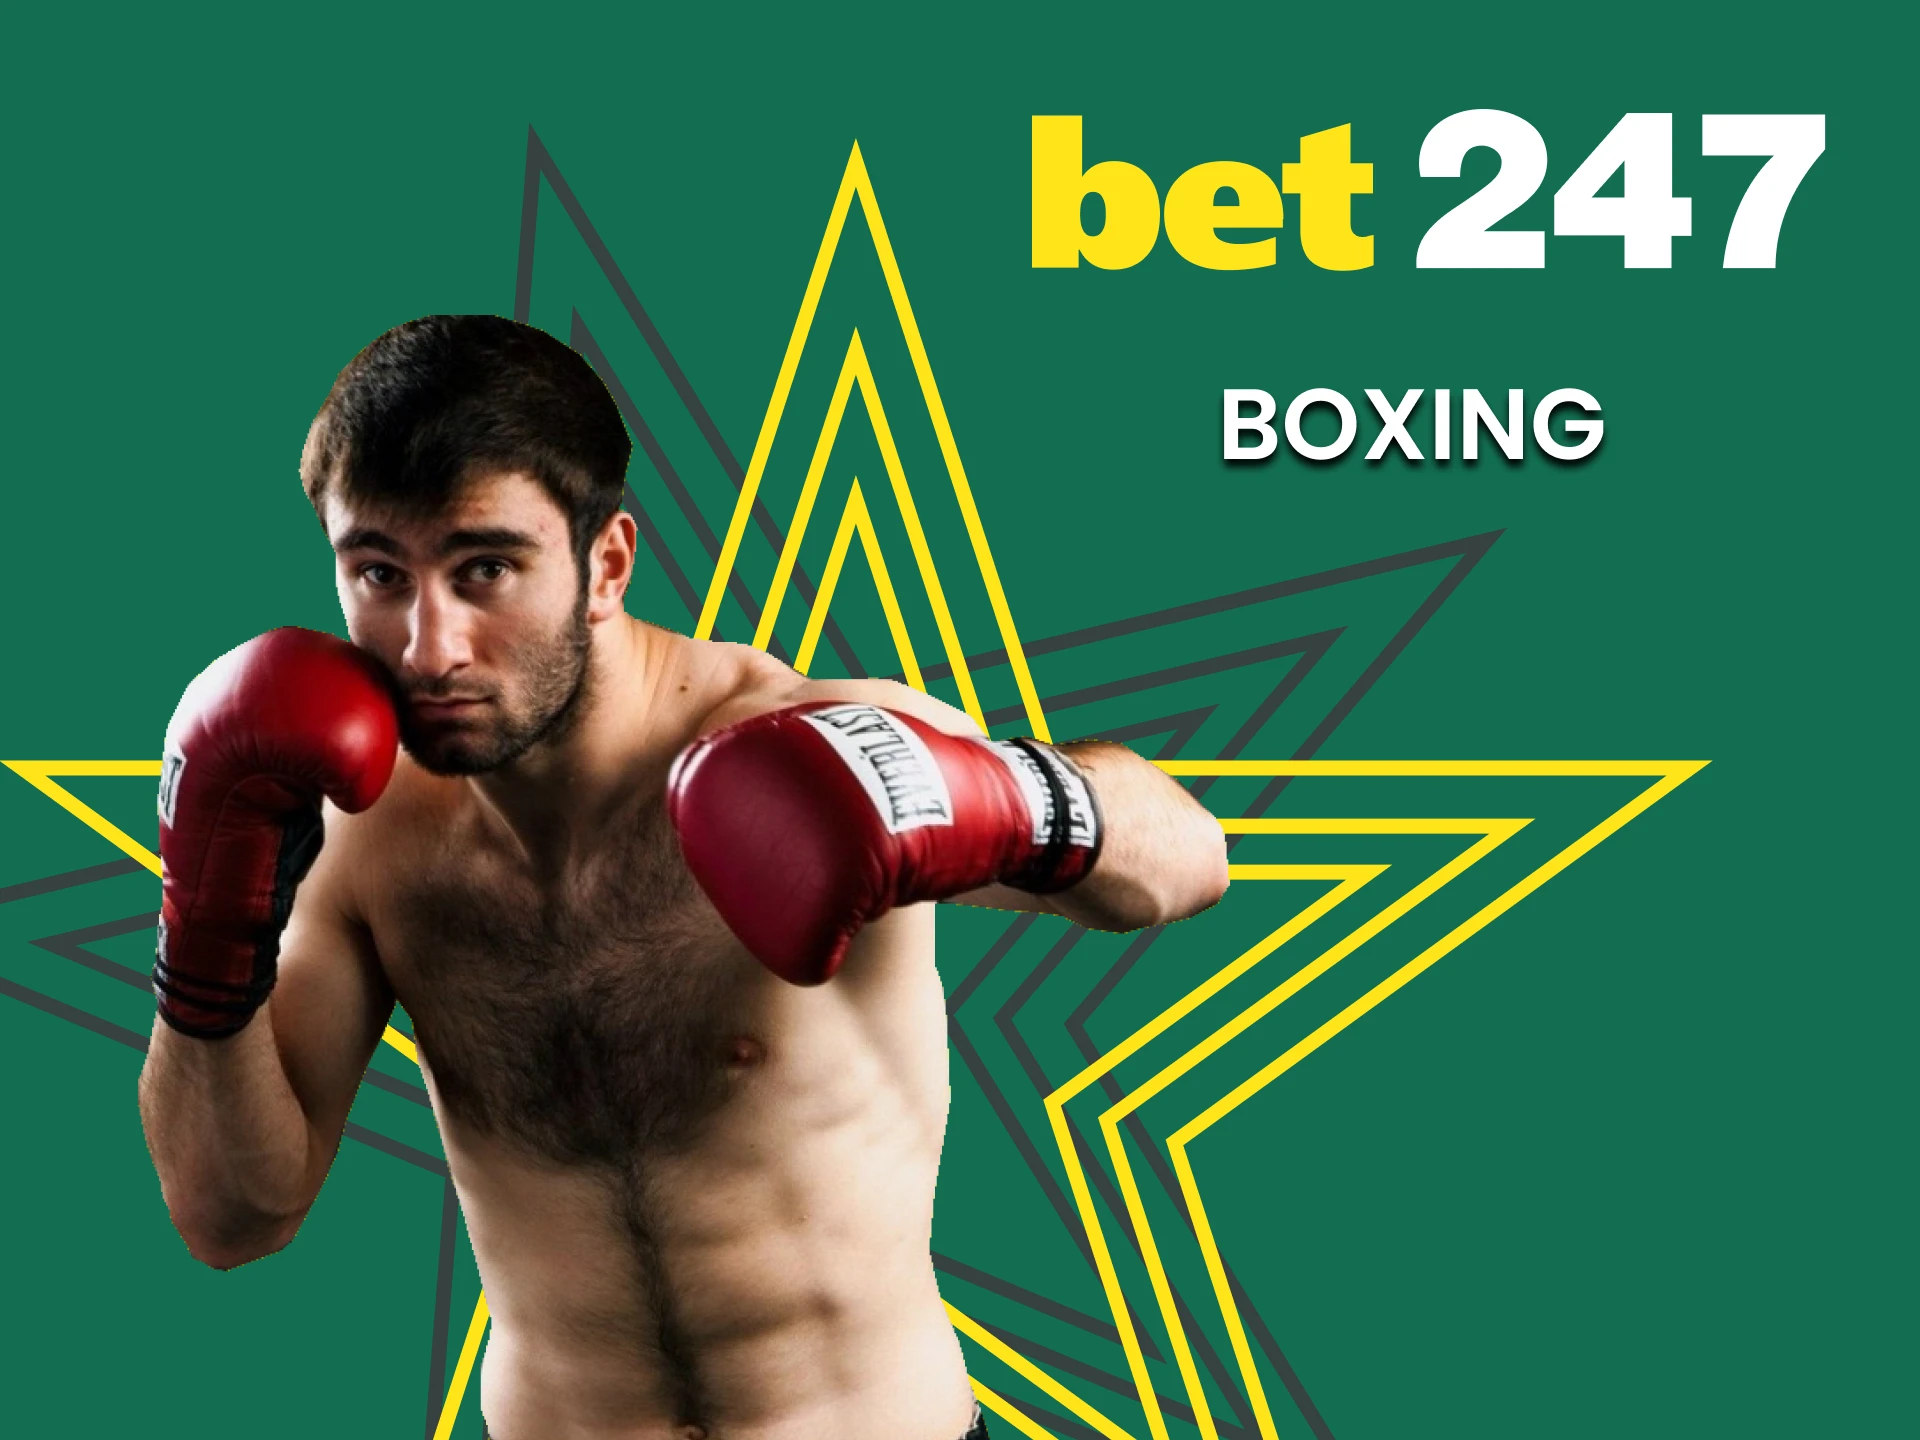 Bet on boxing with Bet247.